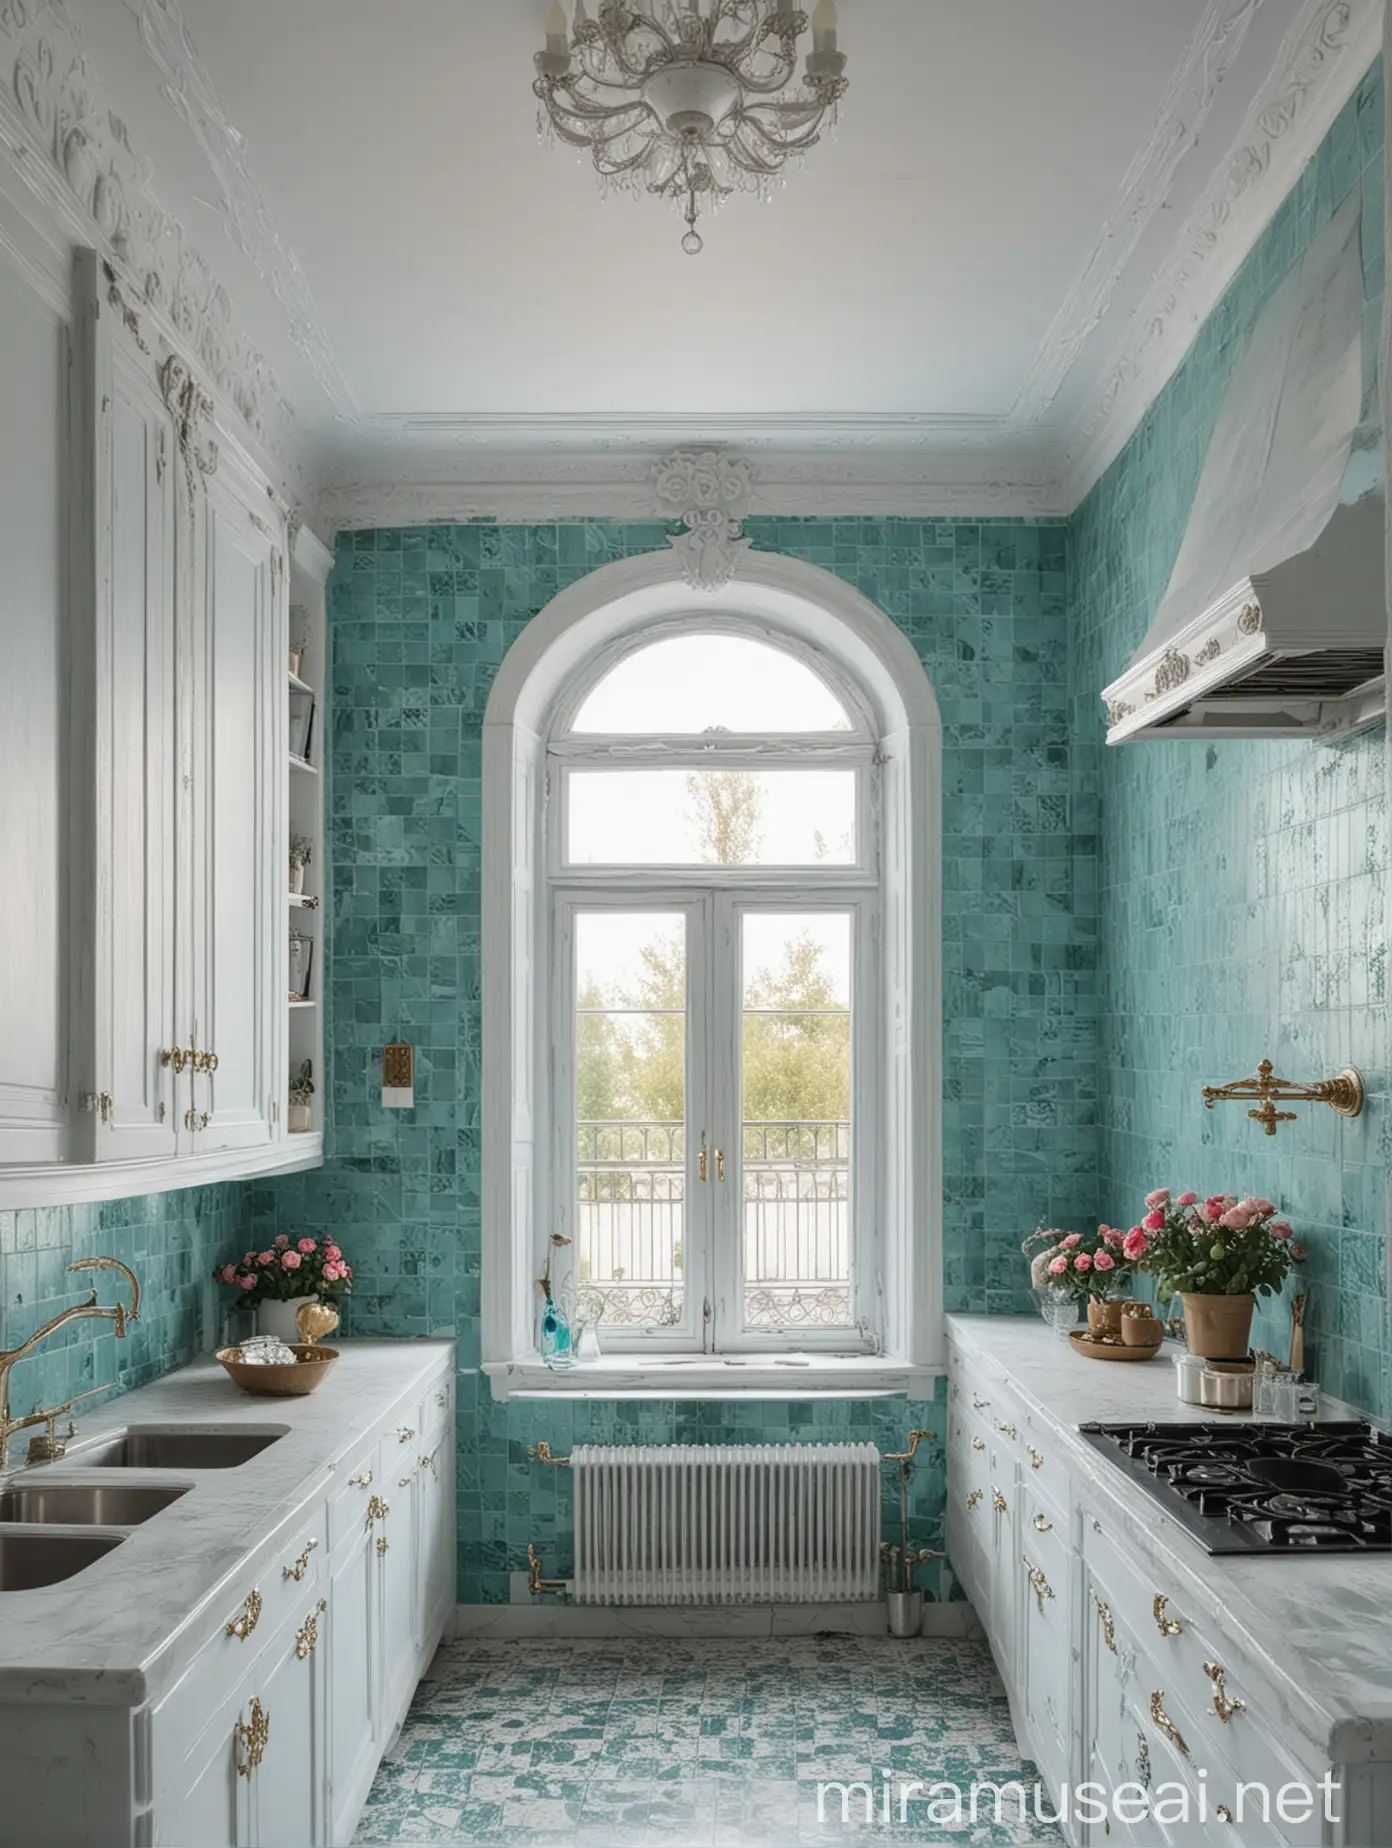 Kitchen, neoclassical style, with turquoise tiles, white and turquoise kitchen. The wall is made of gray decorative plaster. And with roses, around the office, at the top of the ceiling